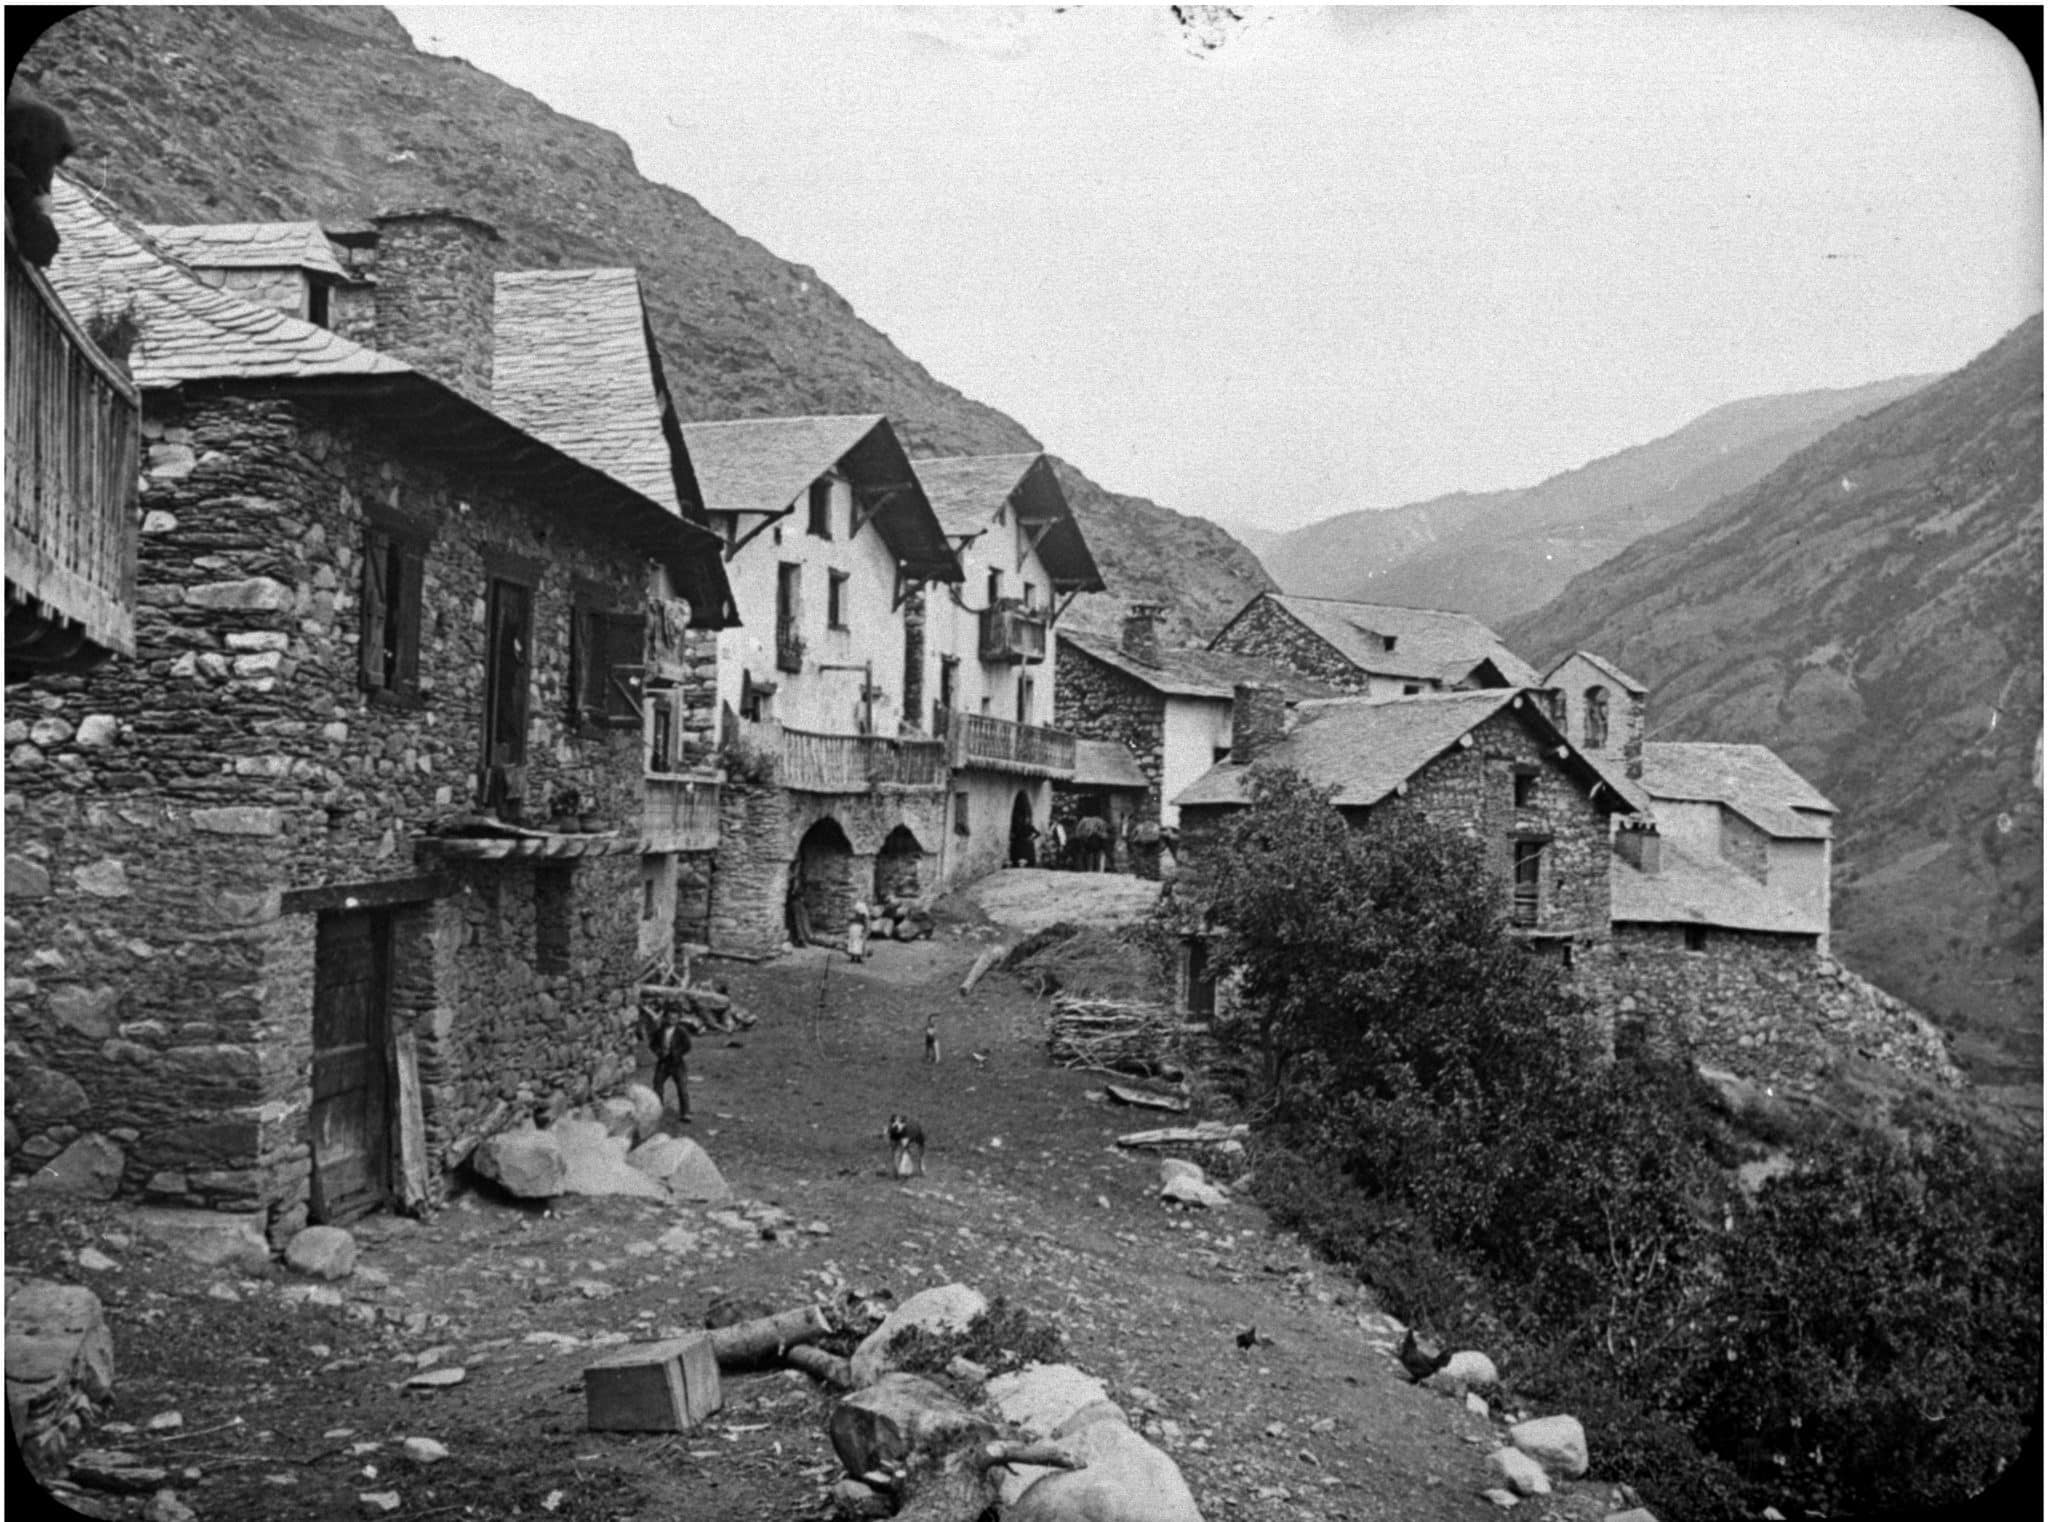 This is what the town of Àrreu looked like at the beginning of the 20th century.